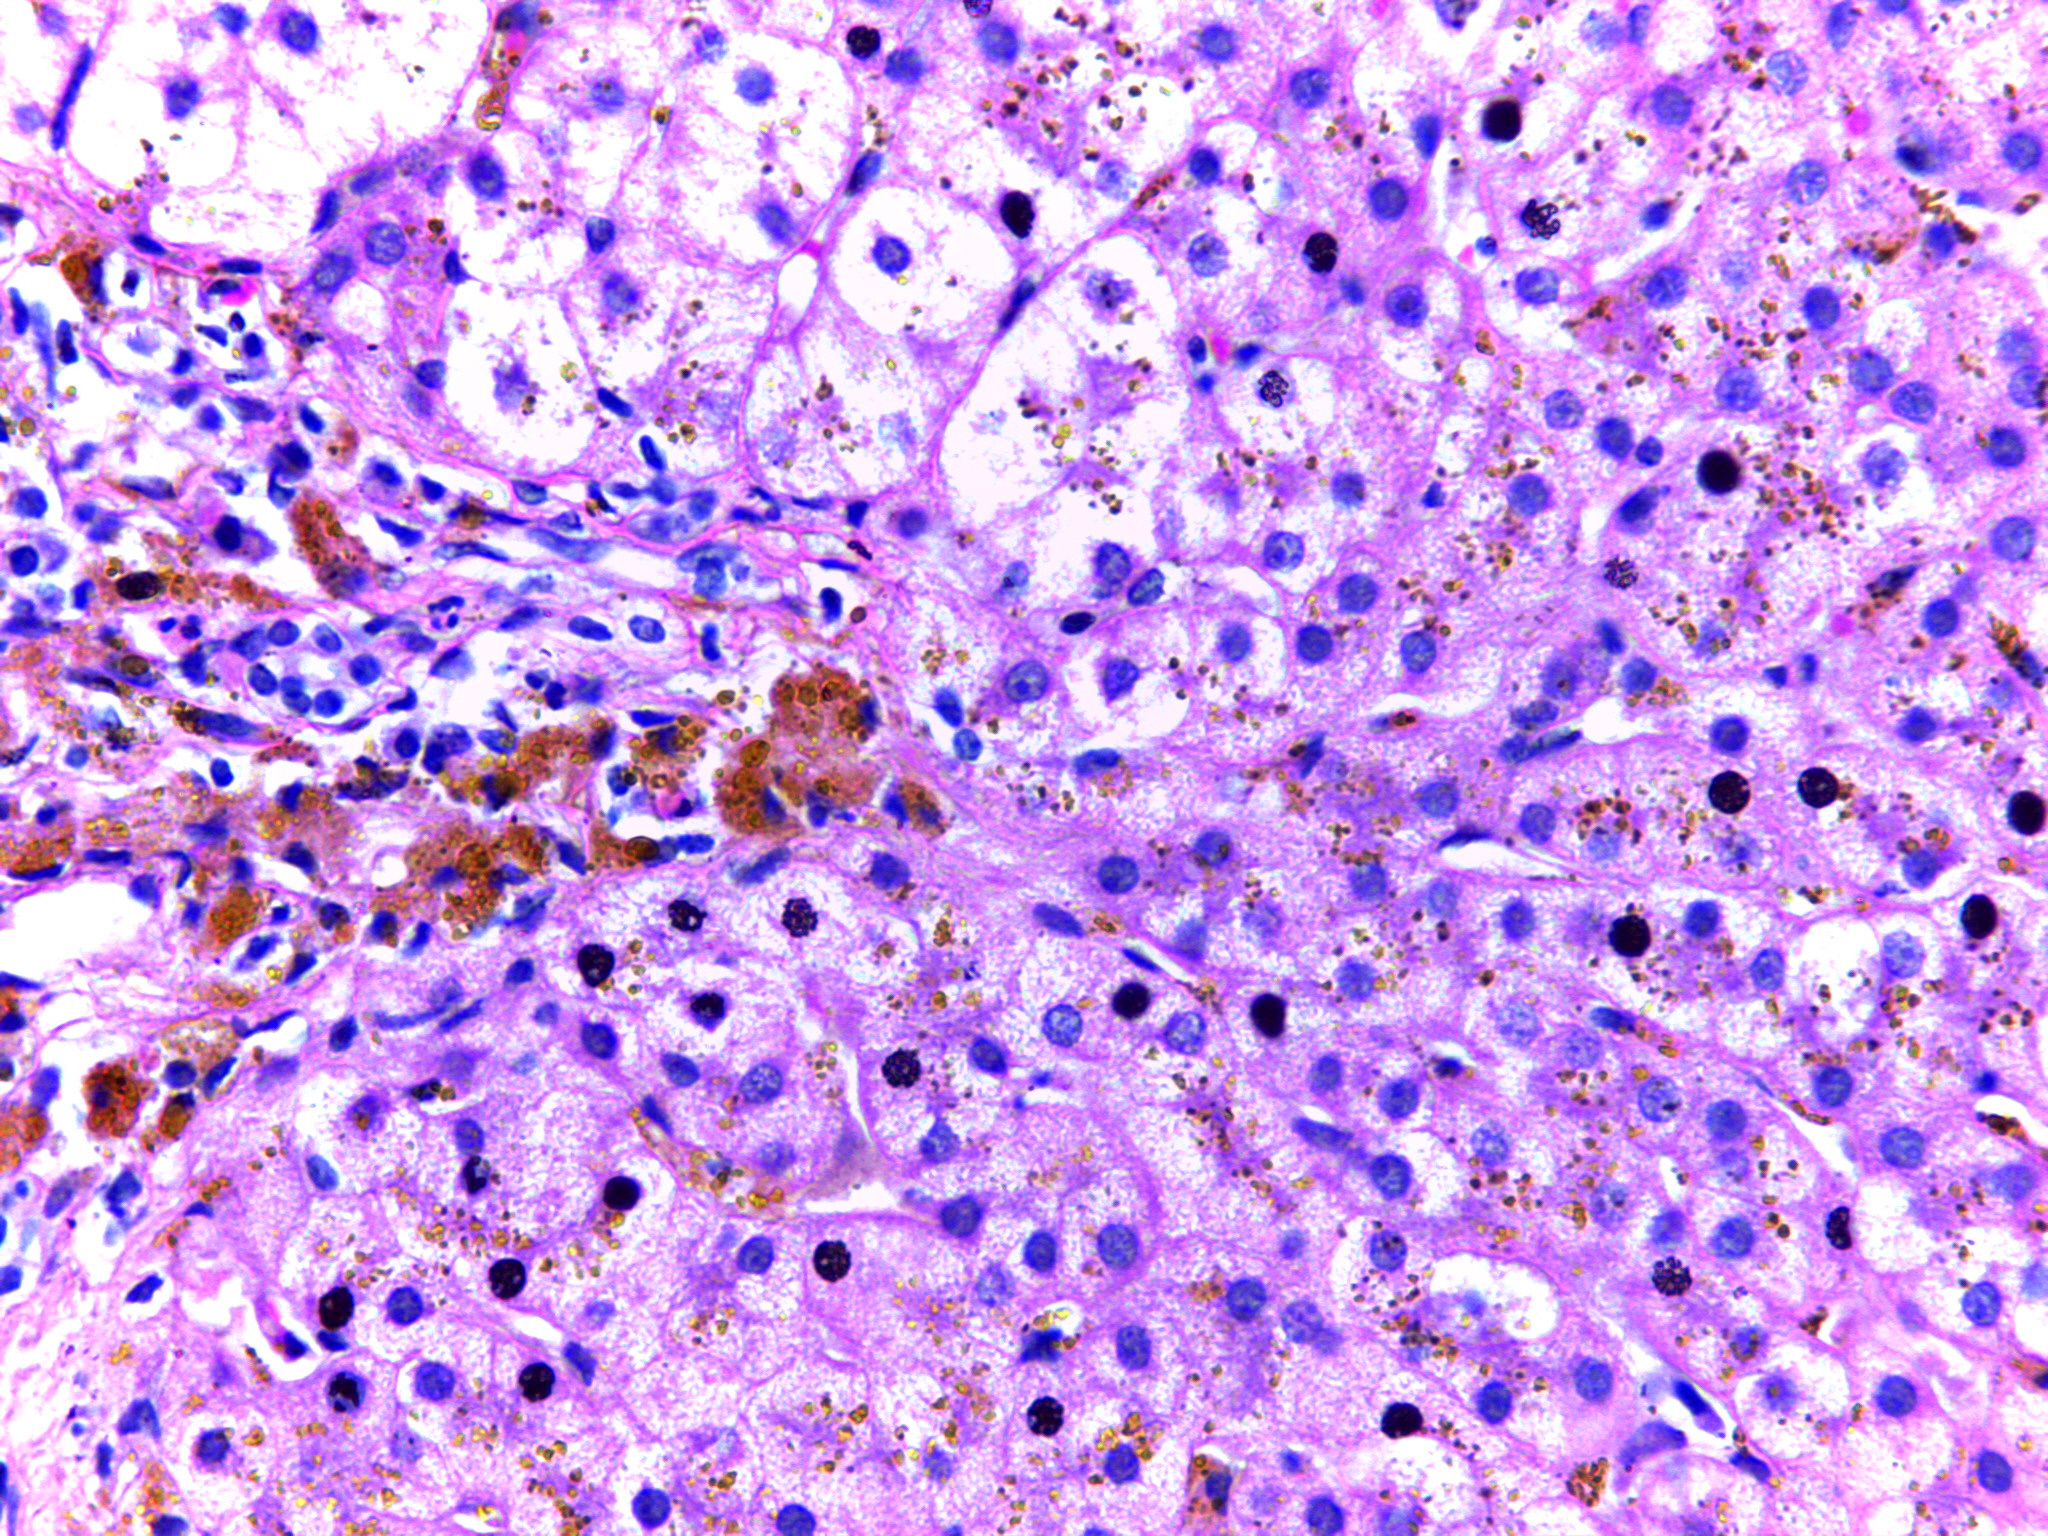 Image 1: Micrograph of hemochromatosis liver showing hepatocytes with coarse golden yellow granules of hemosiderin within the cytoplasm